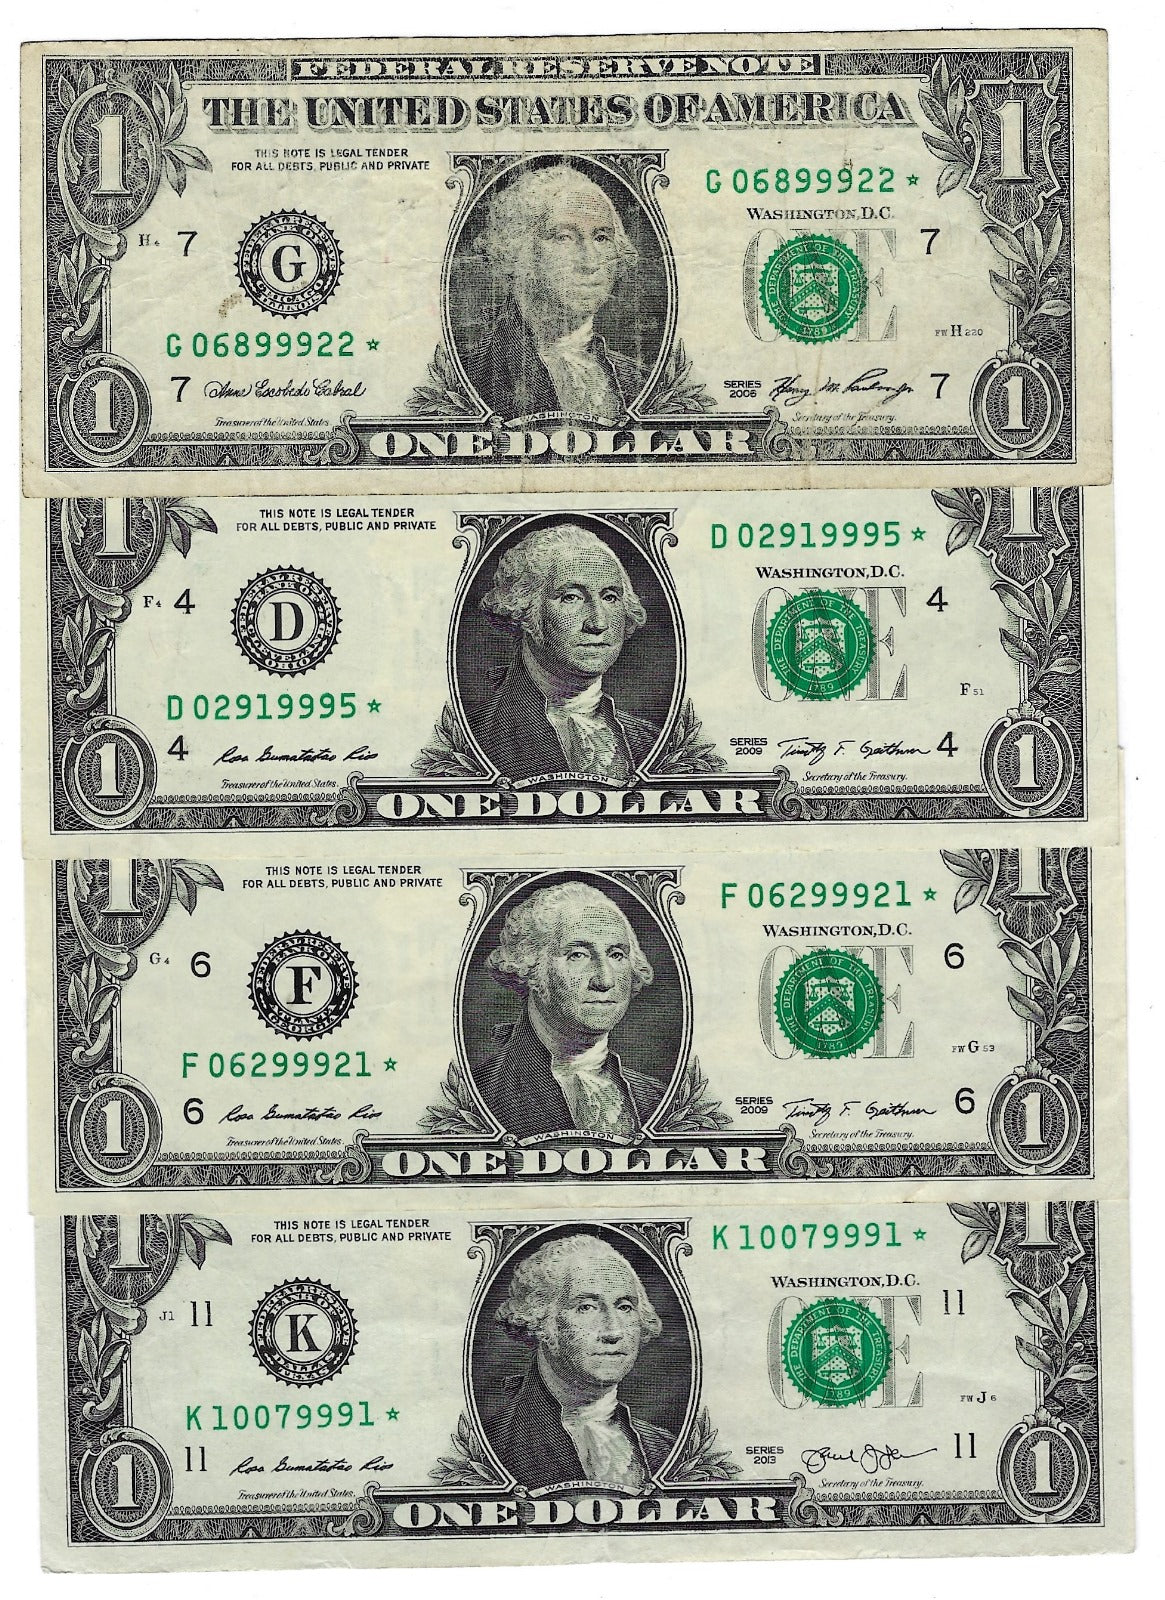 US$1 FRN *Star Note*,Fancy SN Trio 999 x 4 different Districts,VF.FN88
~